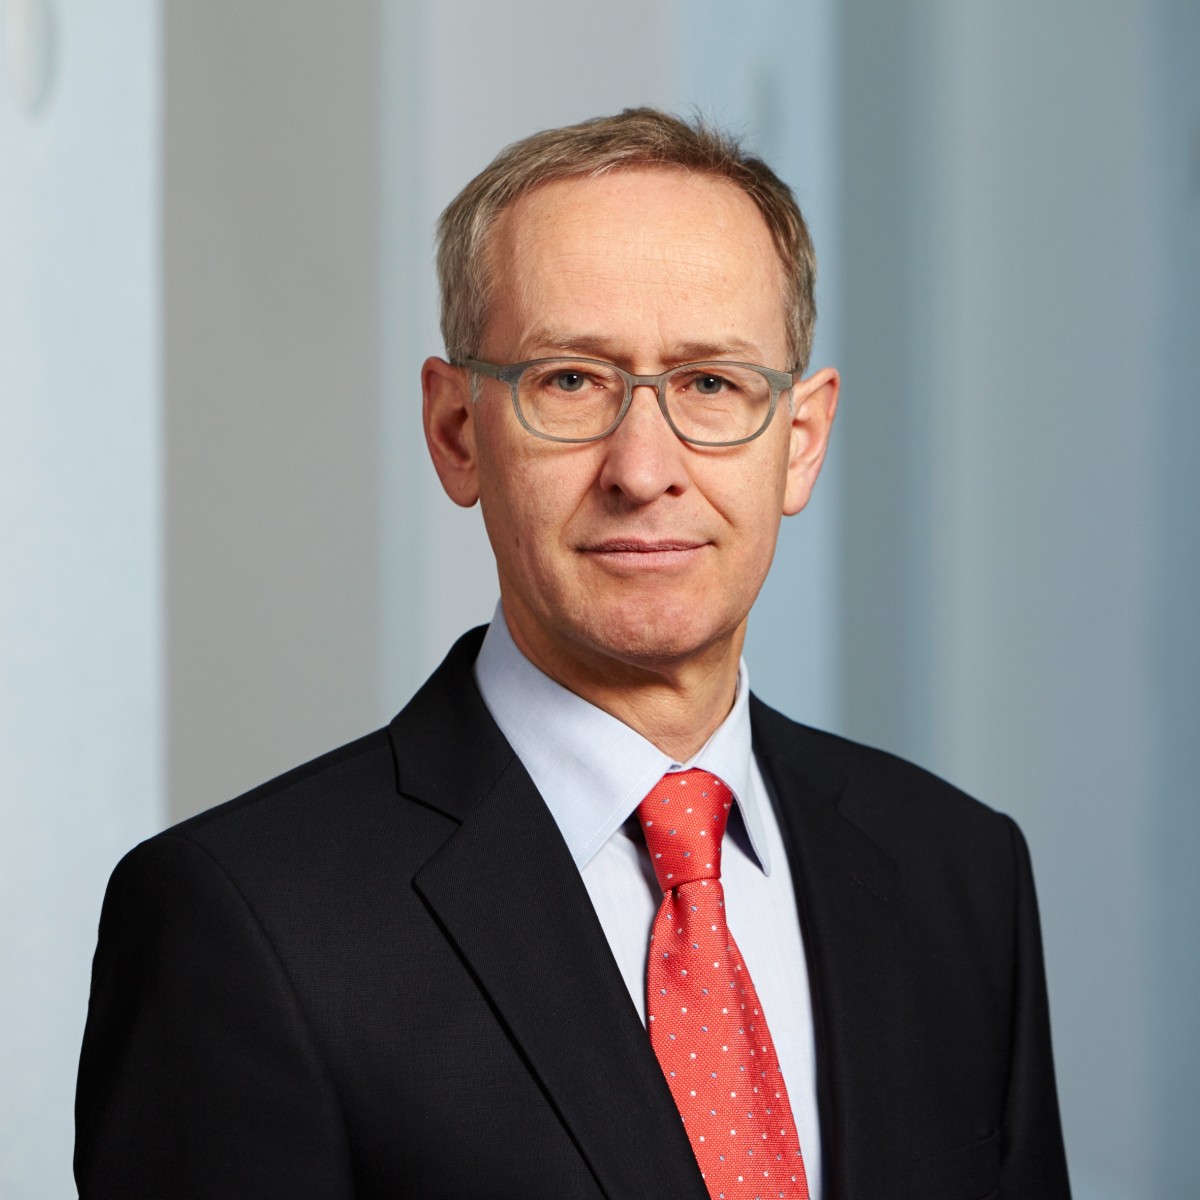 For his farewell lecture, Michael Ambühl, Head of Chair of Negotiation and Conflict Management, talks about Negotiation Engineering. Register now 👇 ethz.ch/en/news-and-ev…